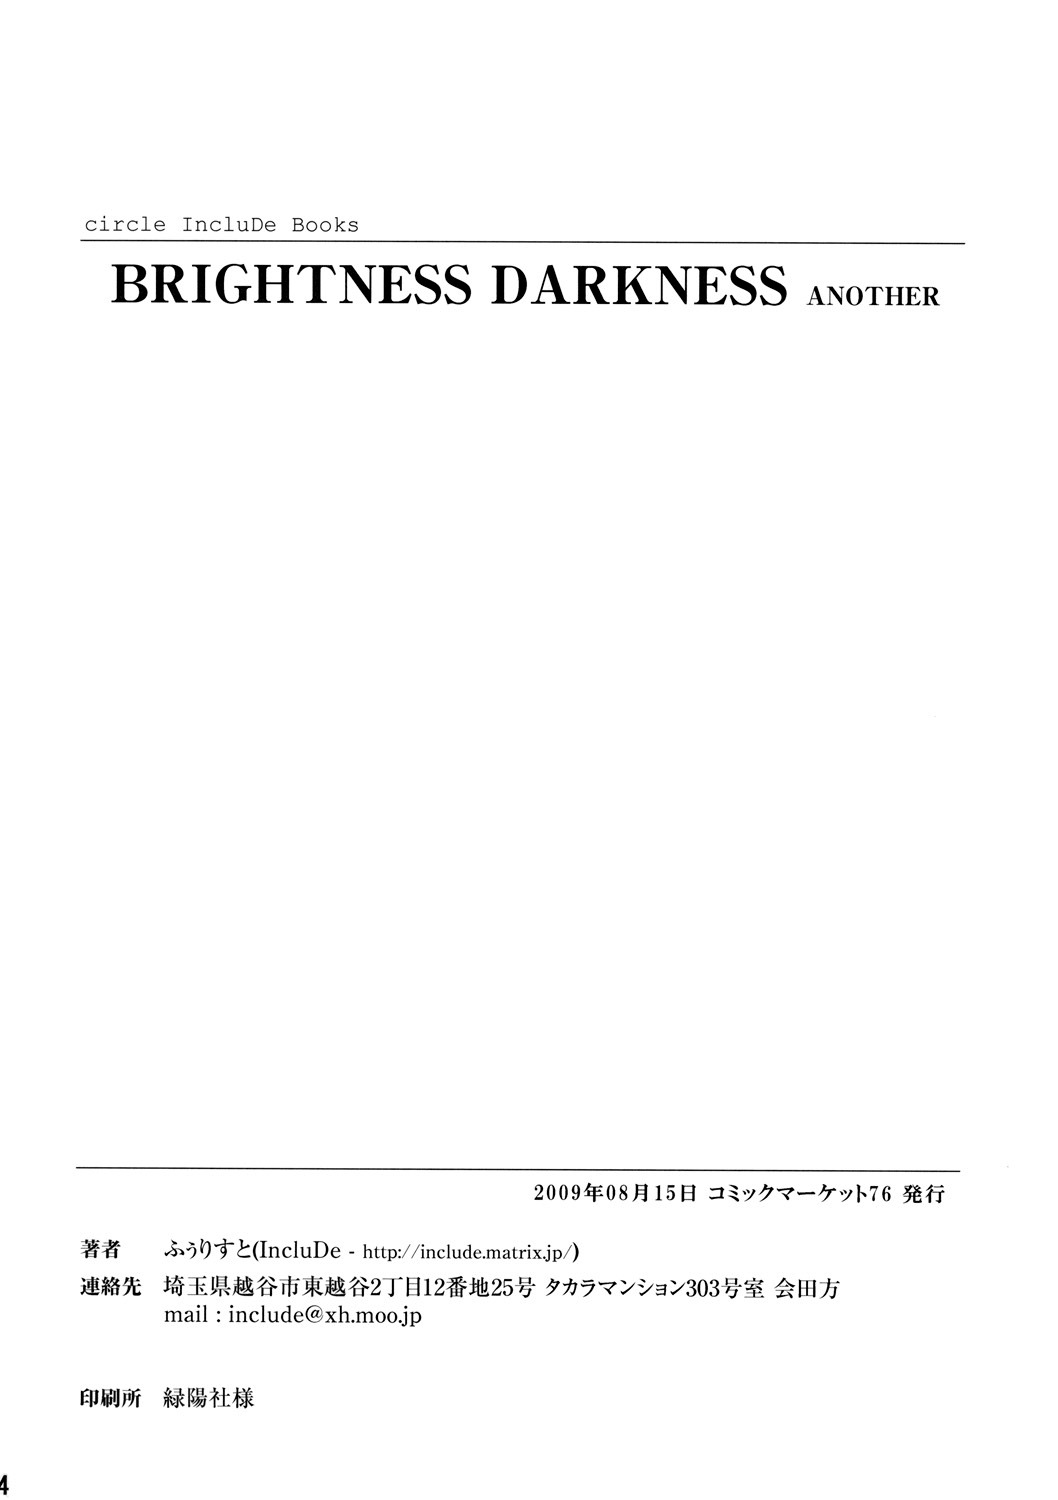 (C76) [IncluDe (ふぅりすと)] 催眠異変 壱 BRIGHTNESS DARKNESS ANOTHER (東方Project) [英訳]